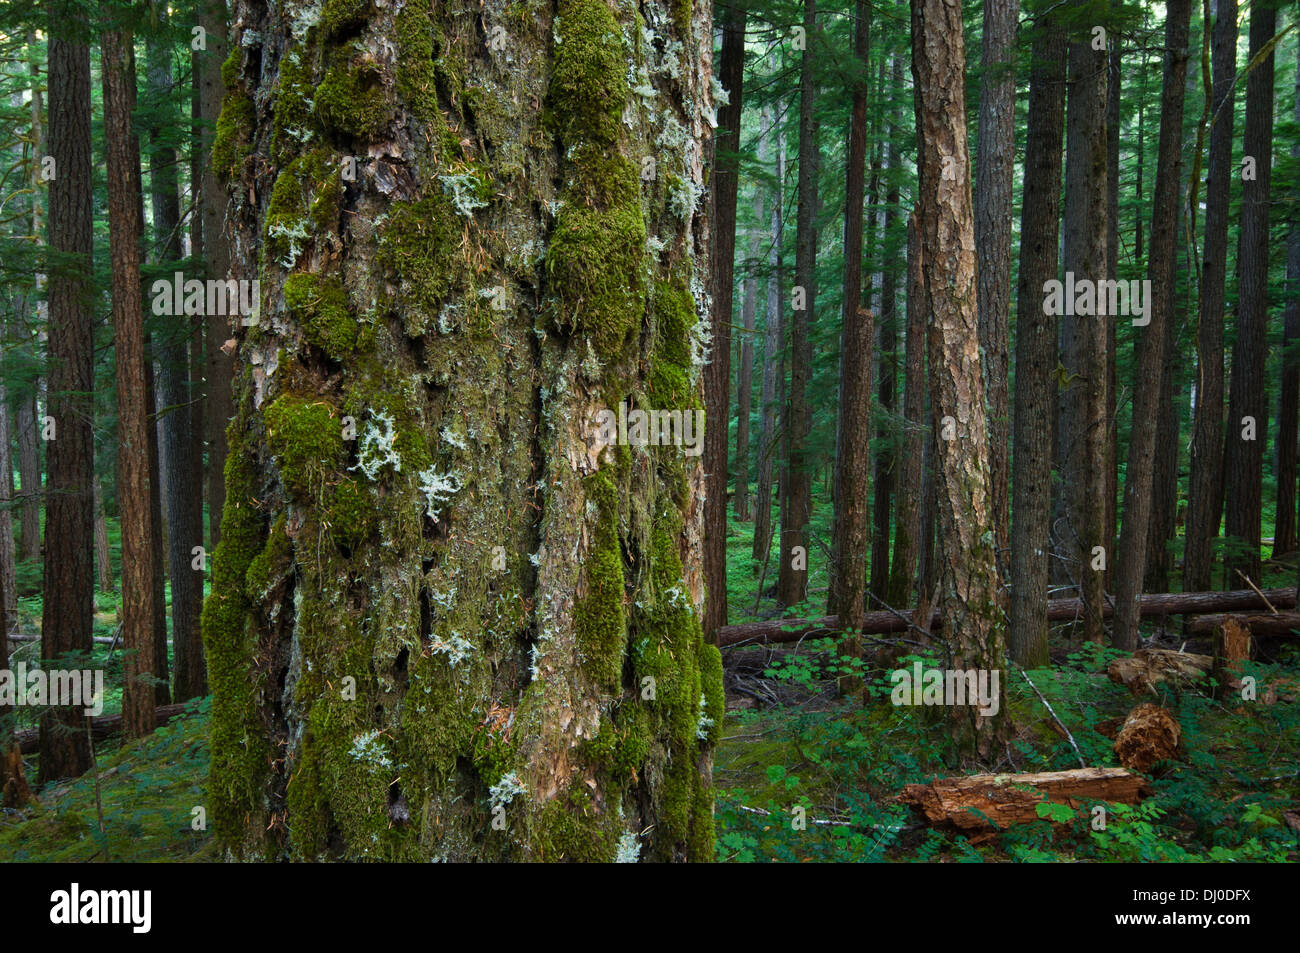 Old growth forest in the Ohanapecosh River Valley, Mount Rainier National Park, Washington, USA Stock Photo